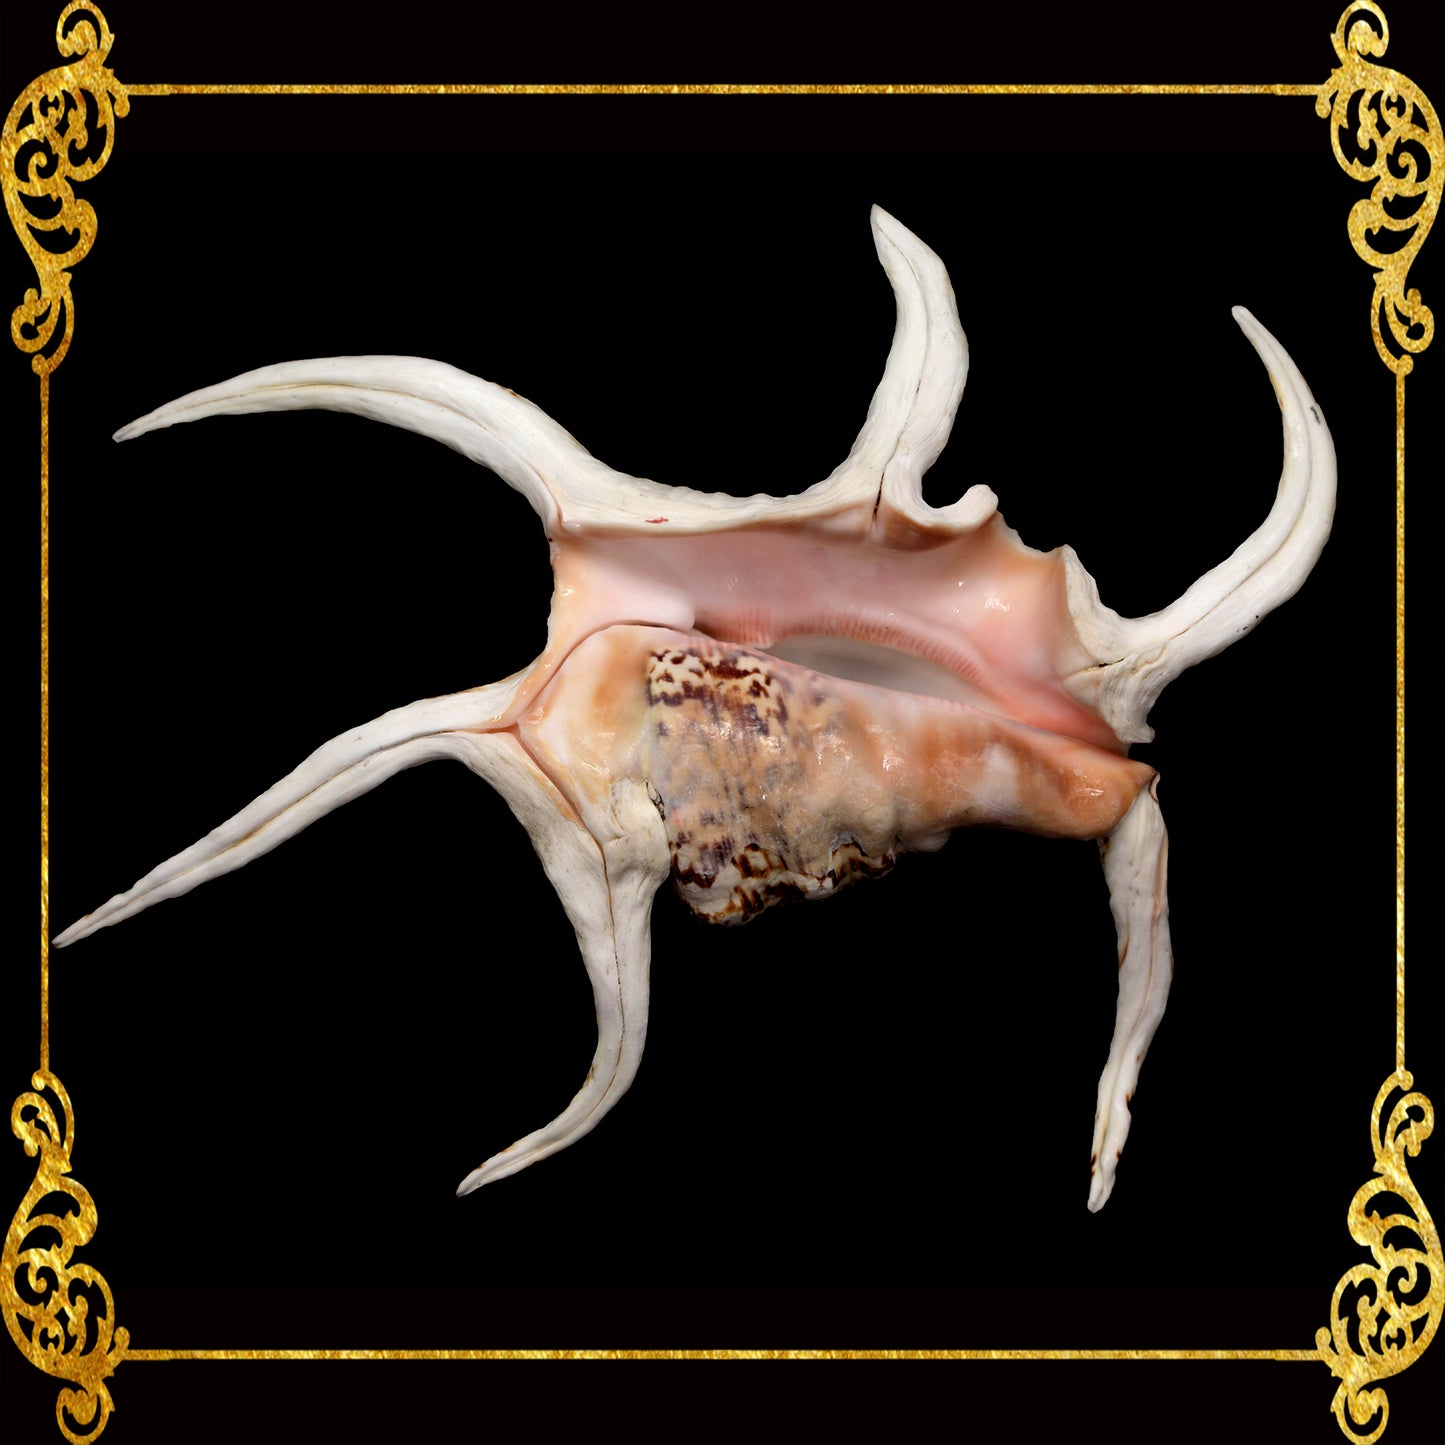 Lambis Chiragra | Spider Conch | 7 - 9 Inches | Large